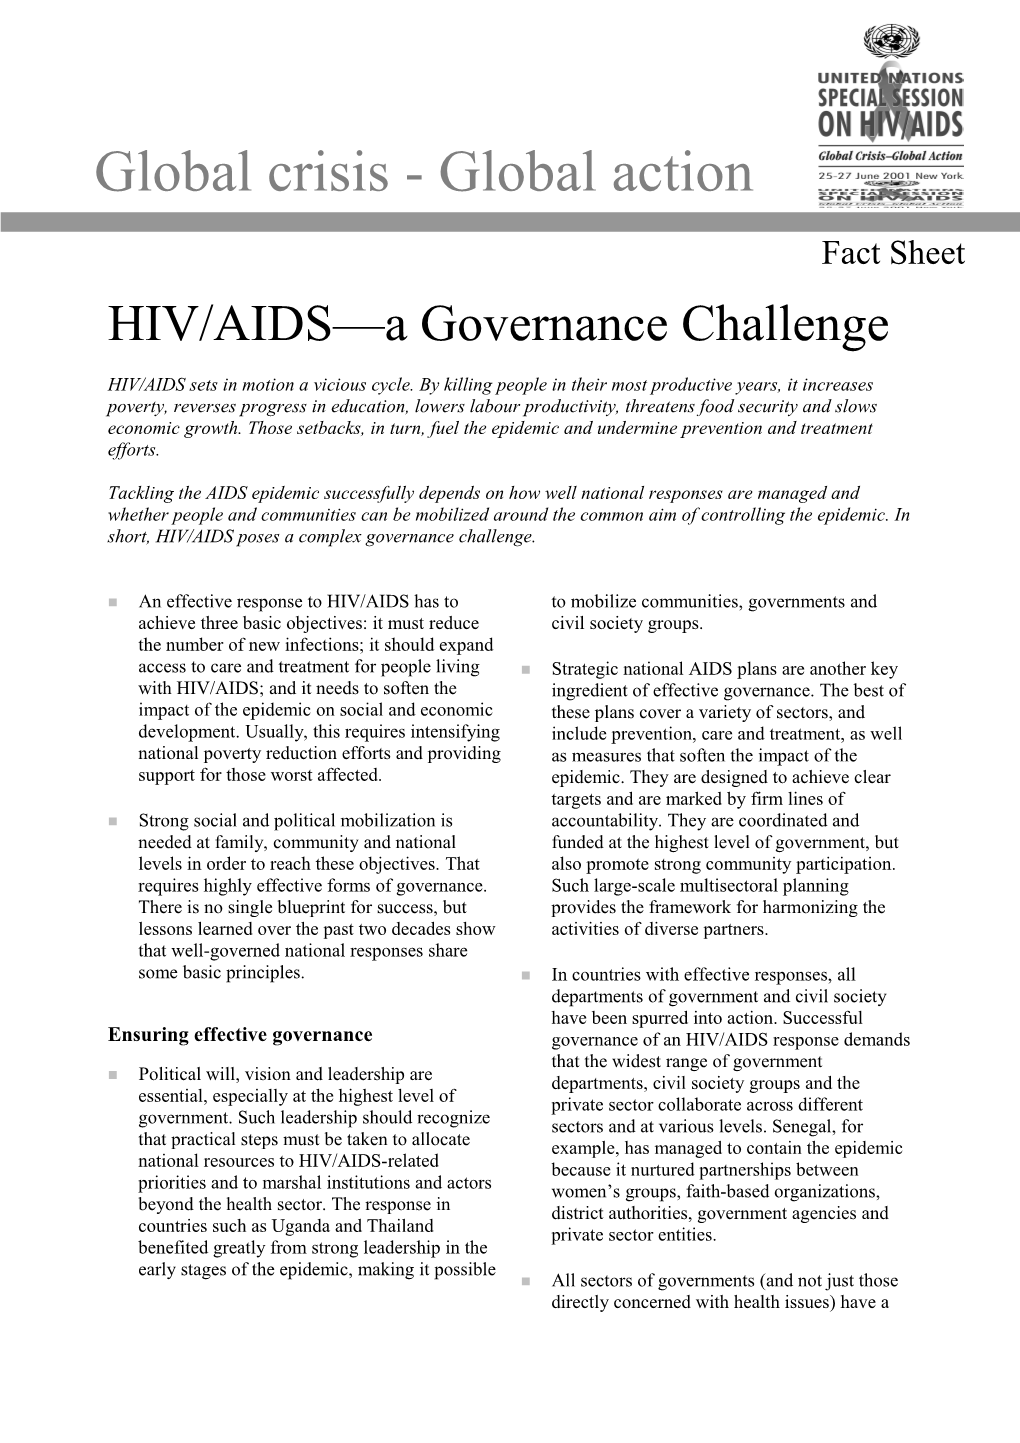 HIV/AIDS Care and Support